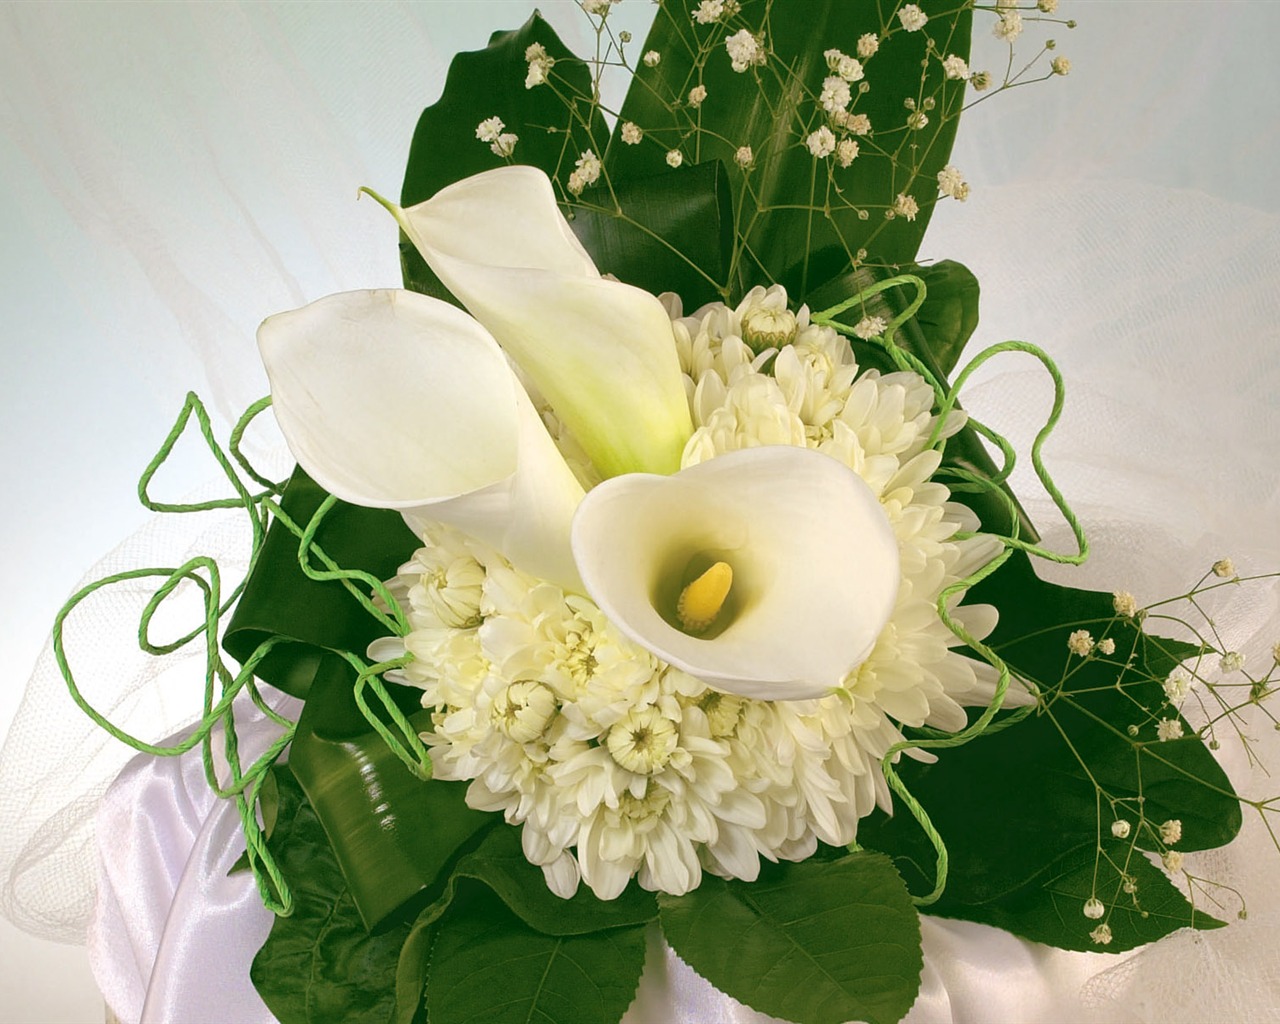 Weddings and Flowers wallpaper (1) #9 - 1280x1024